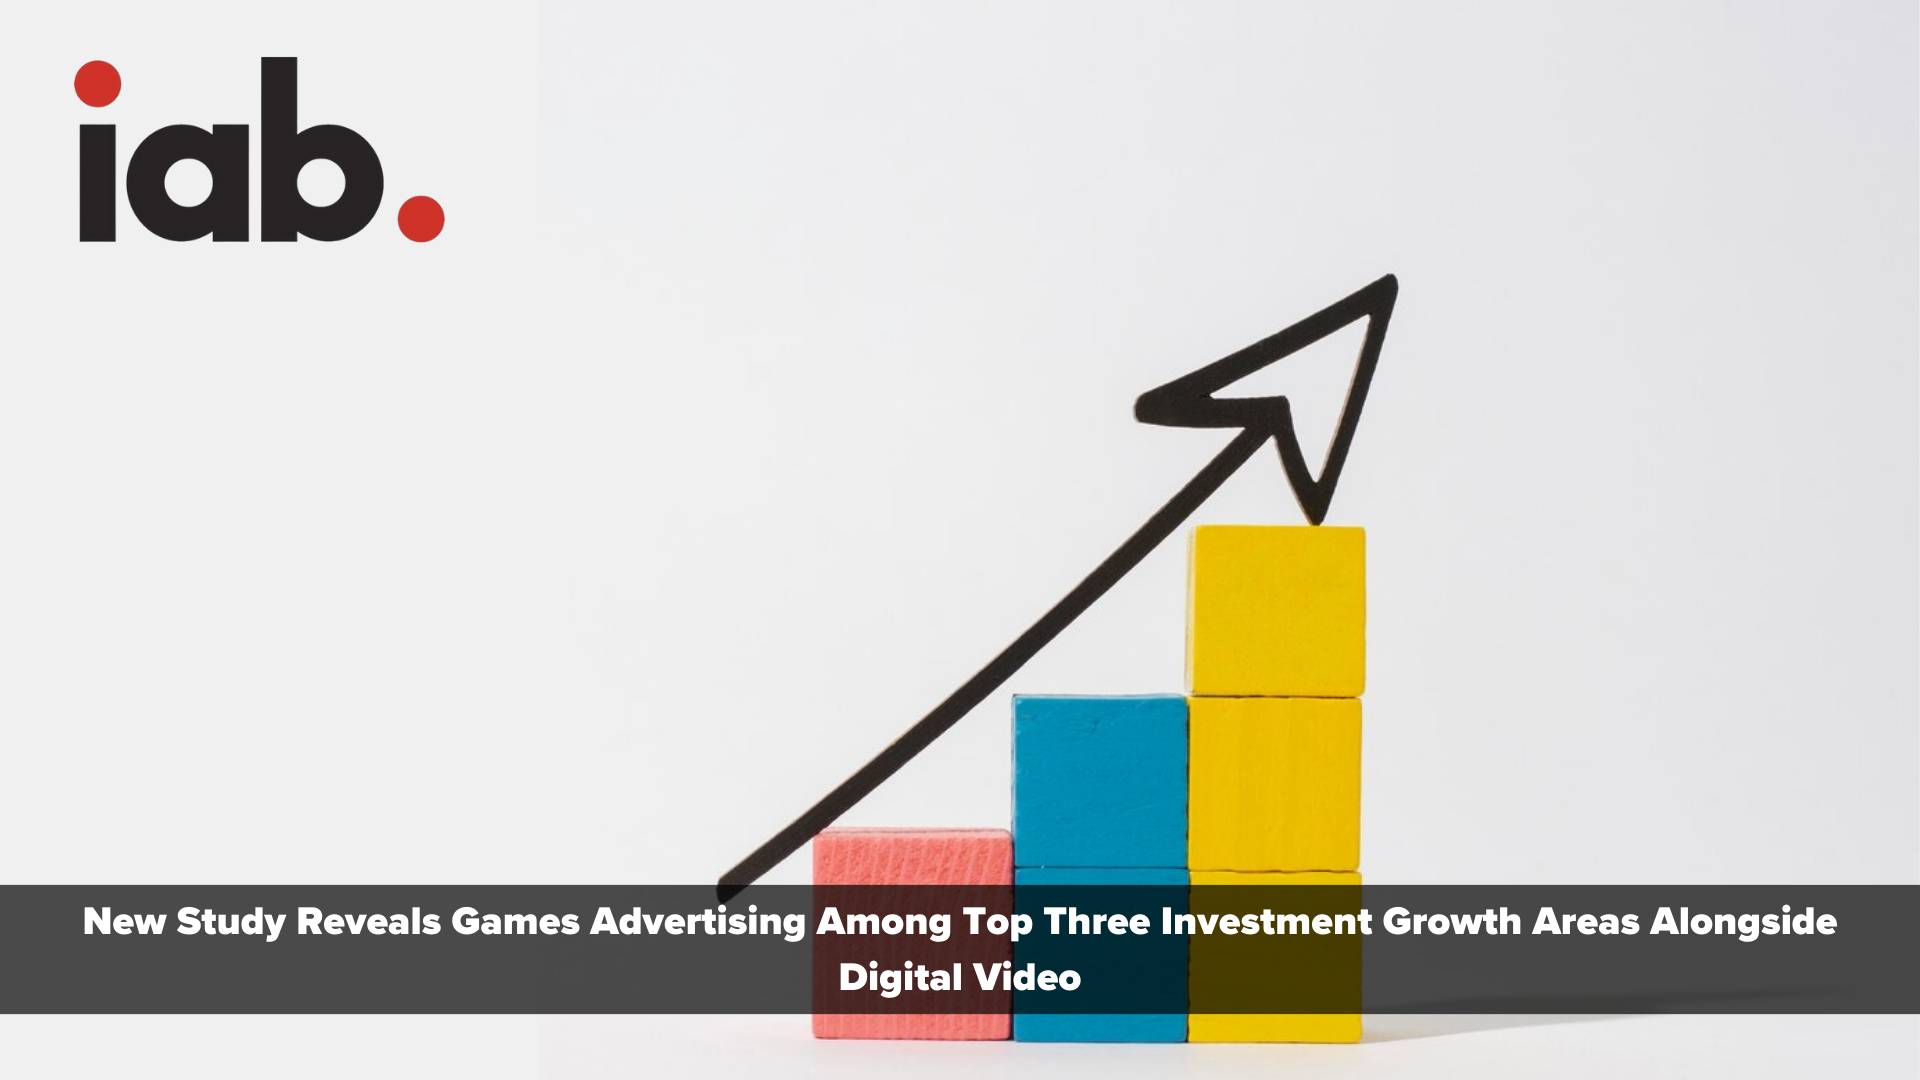 New IAB Study Reveals Games Advertising Among Top Three Investment Growth Areas Alongside Digital Video